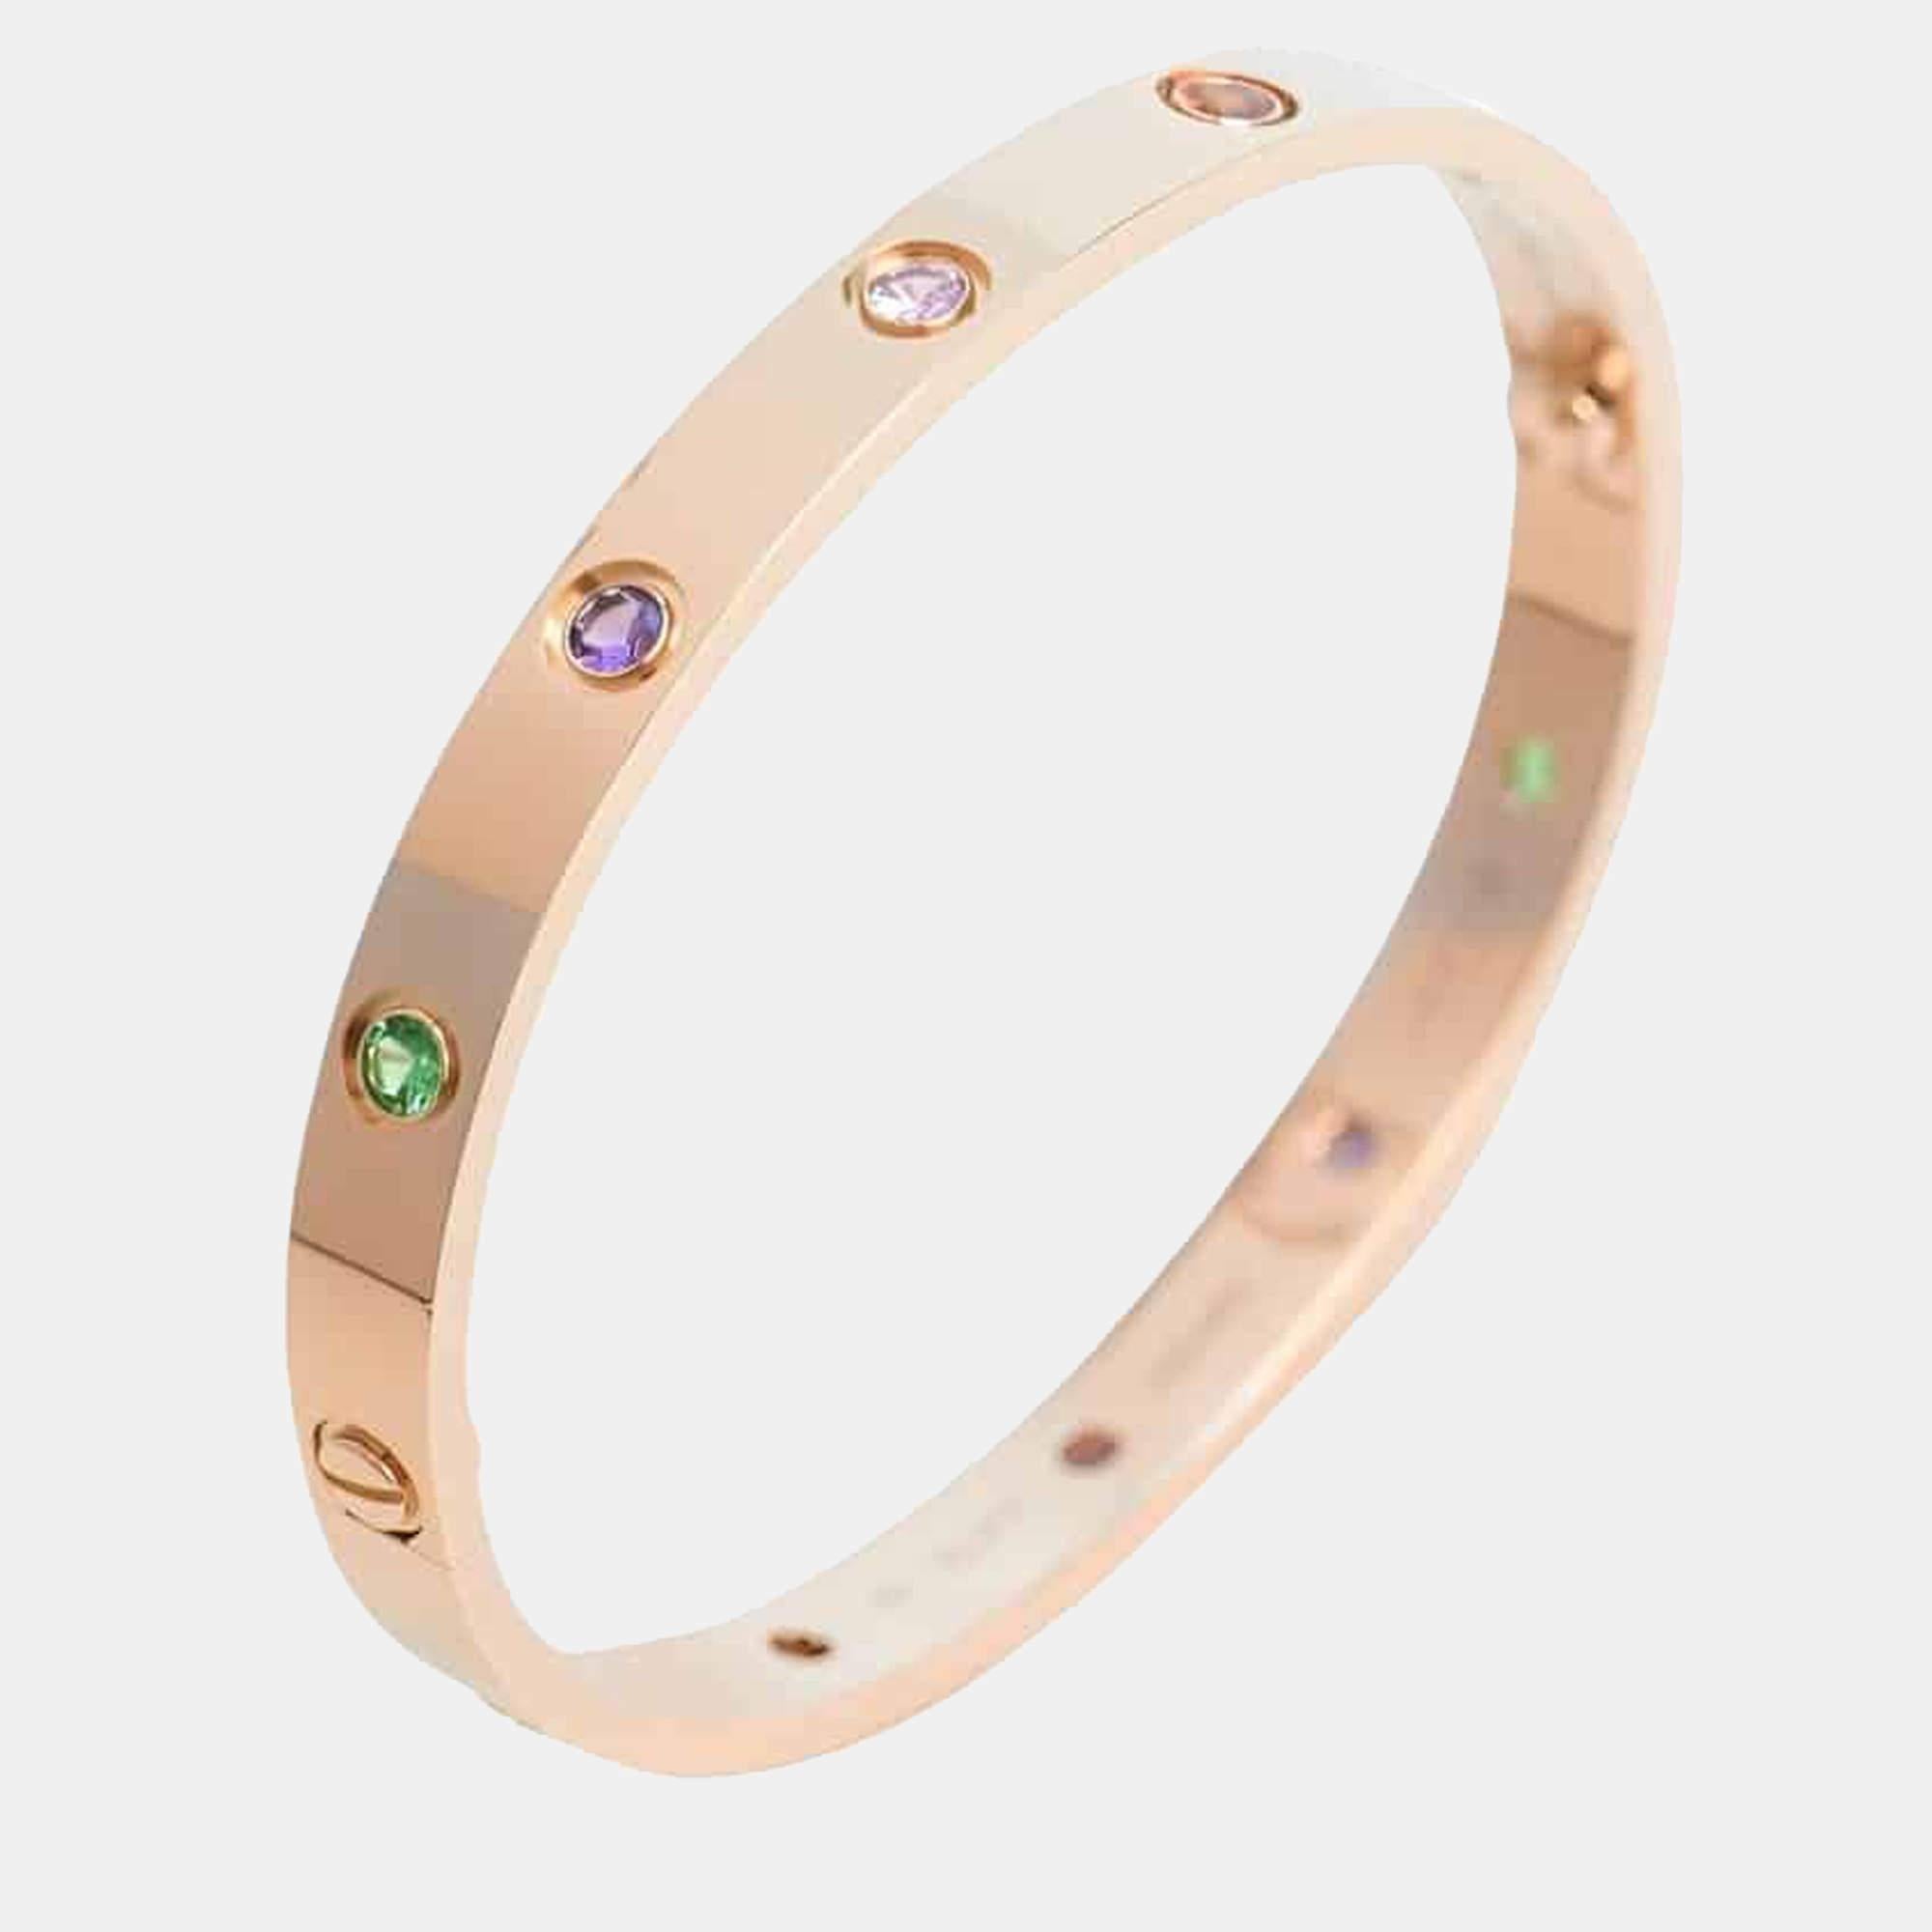 The 18k rose gold 10 multi-gem set Love bangle bracelet by Cartier is a true testament to the brand's exquisite craftsmanship and iconic design. 

This stunning bangle is adorned with a vibrant array of gemstones, including yellow and pink